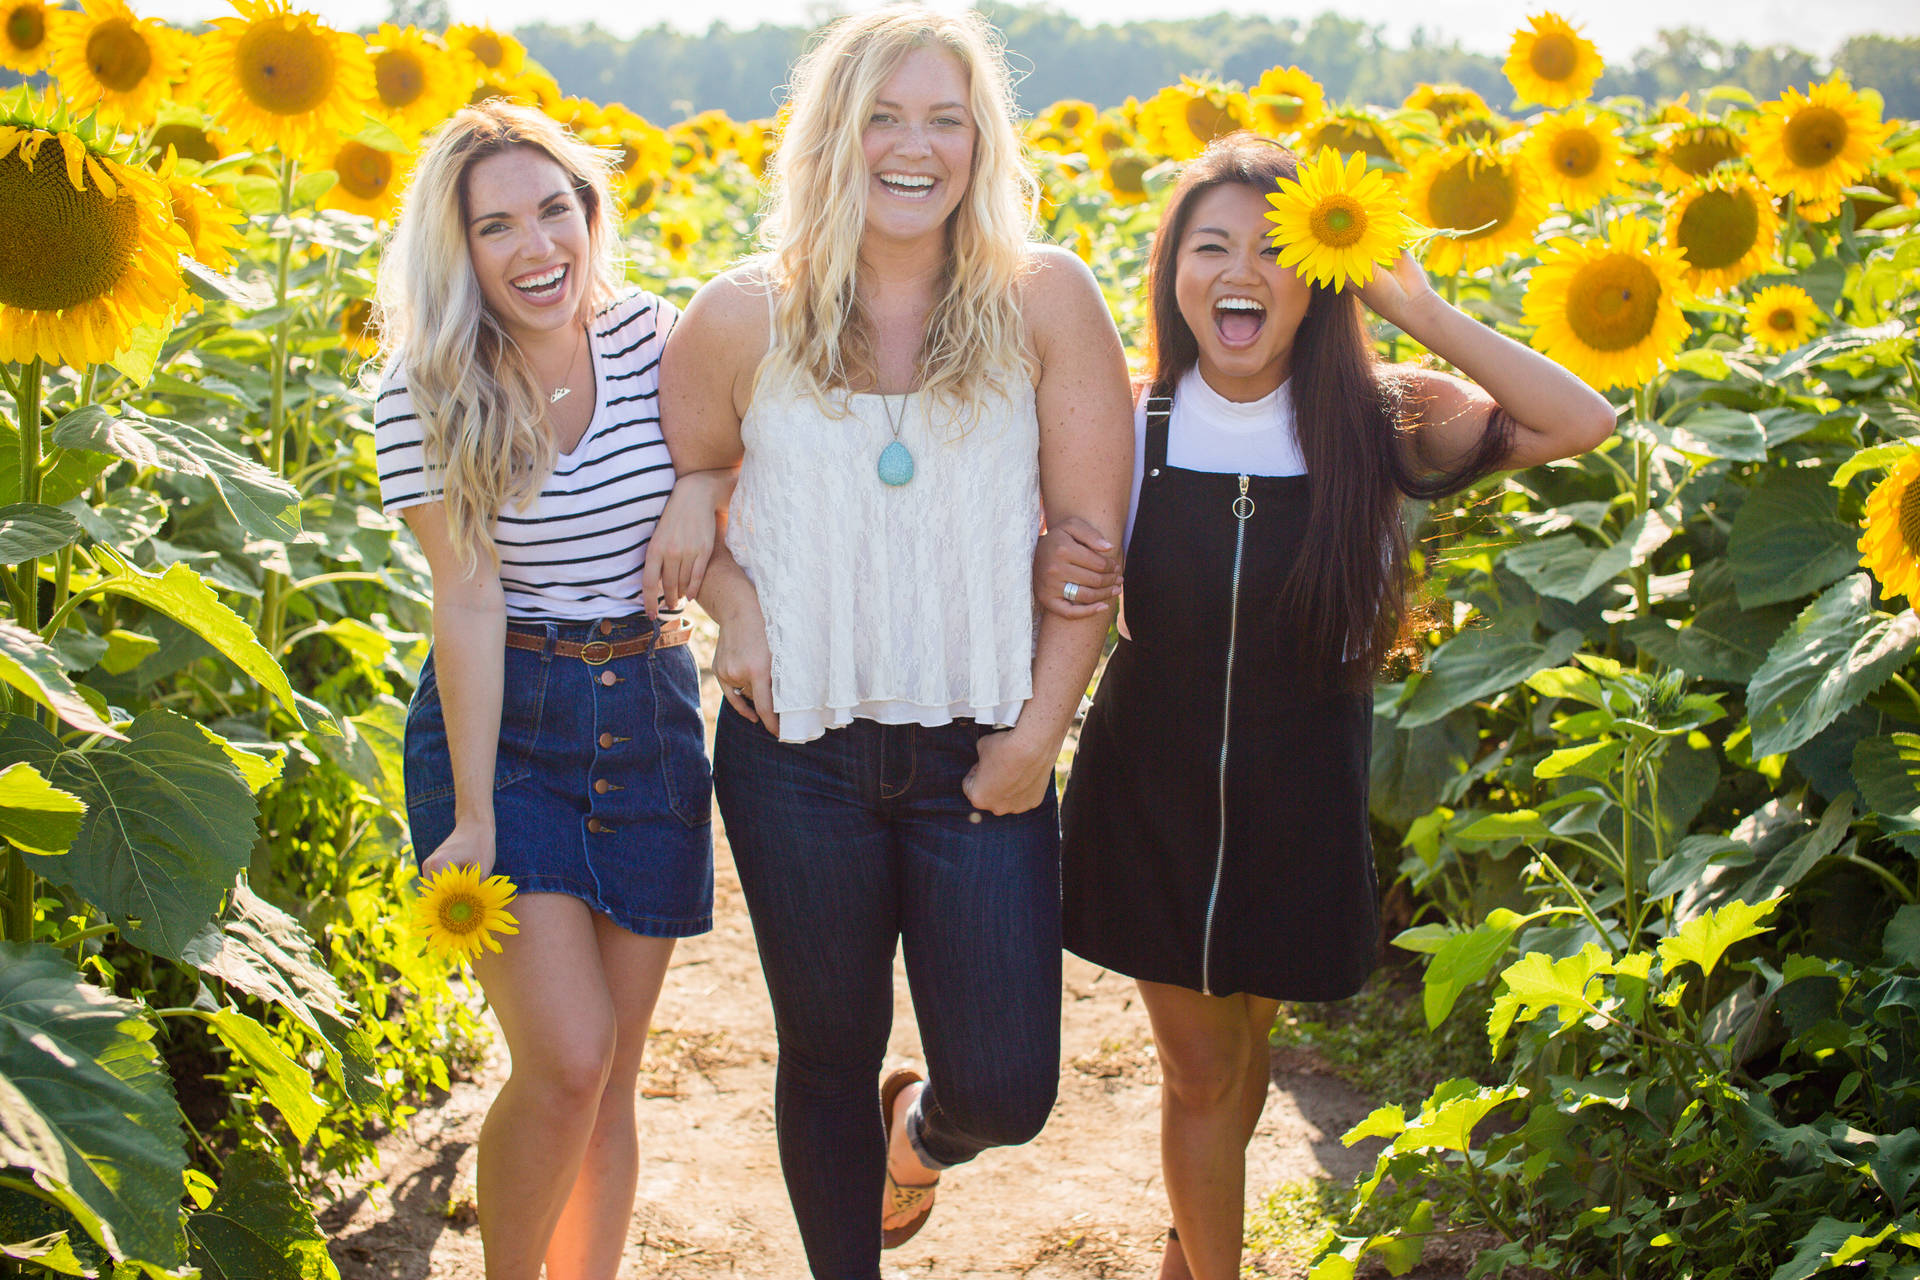 Cute Best Friends With Sunflowers Background